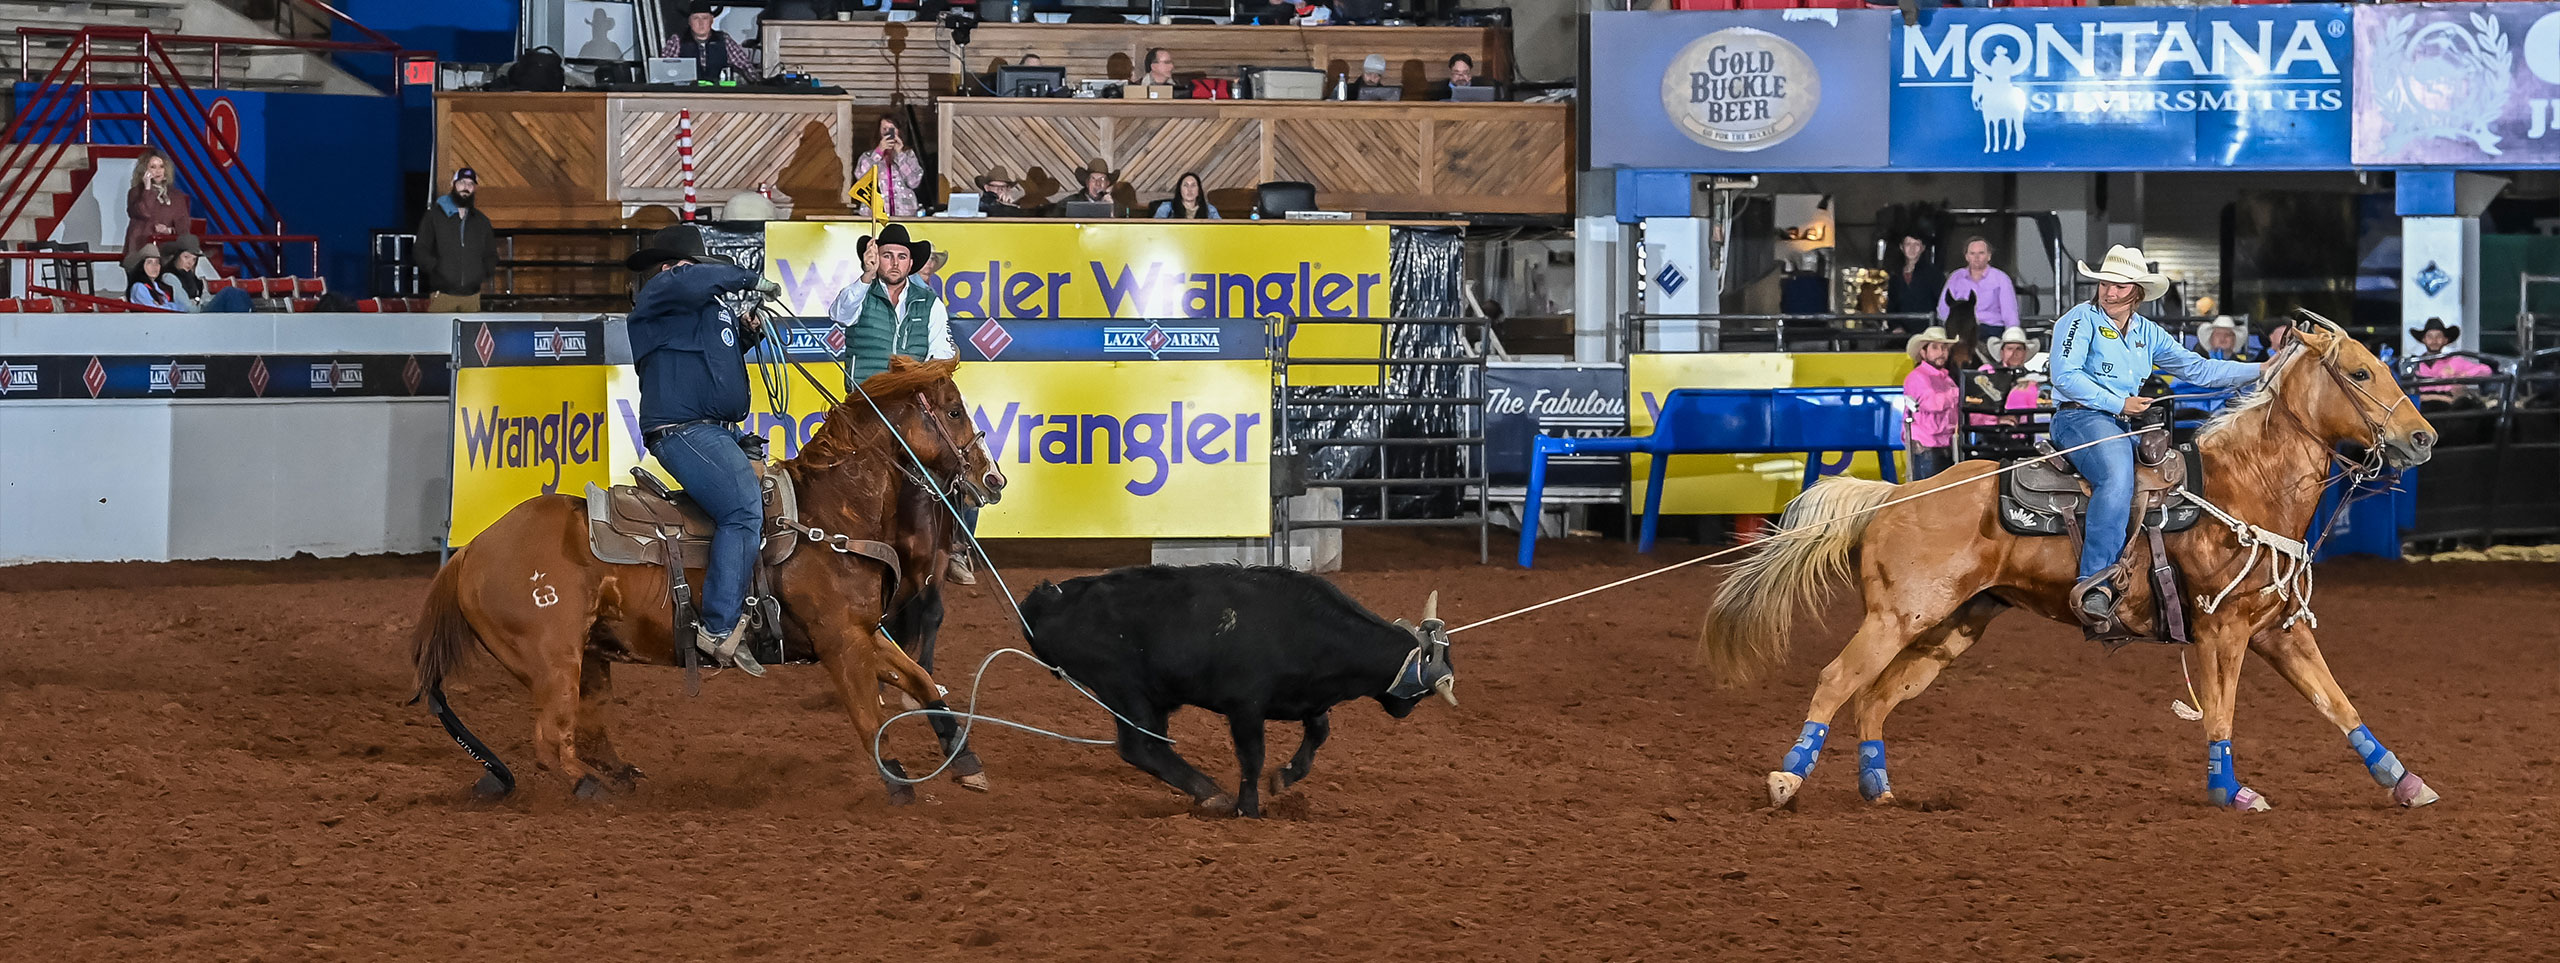 <strong>Kelton and DeSalvo Take Home the Charlie 1 Horse All Girl Team Roping Title</strong>